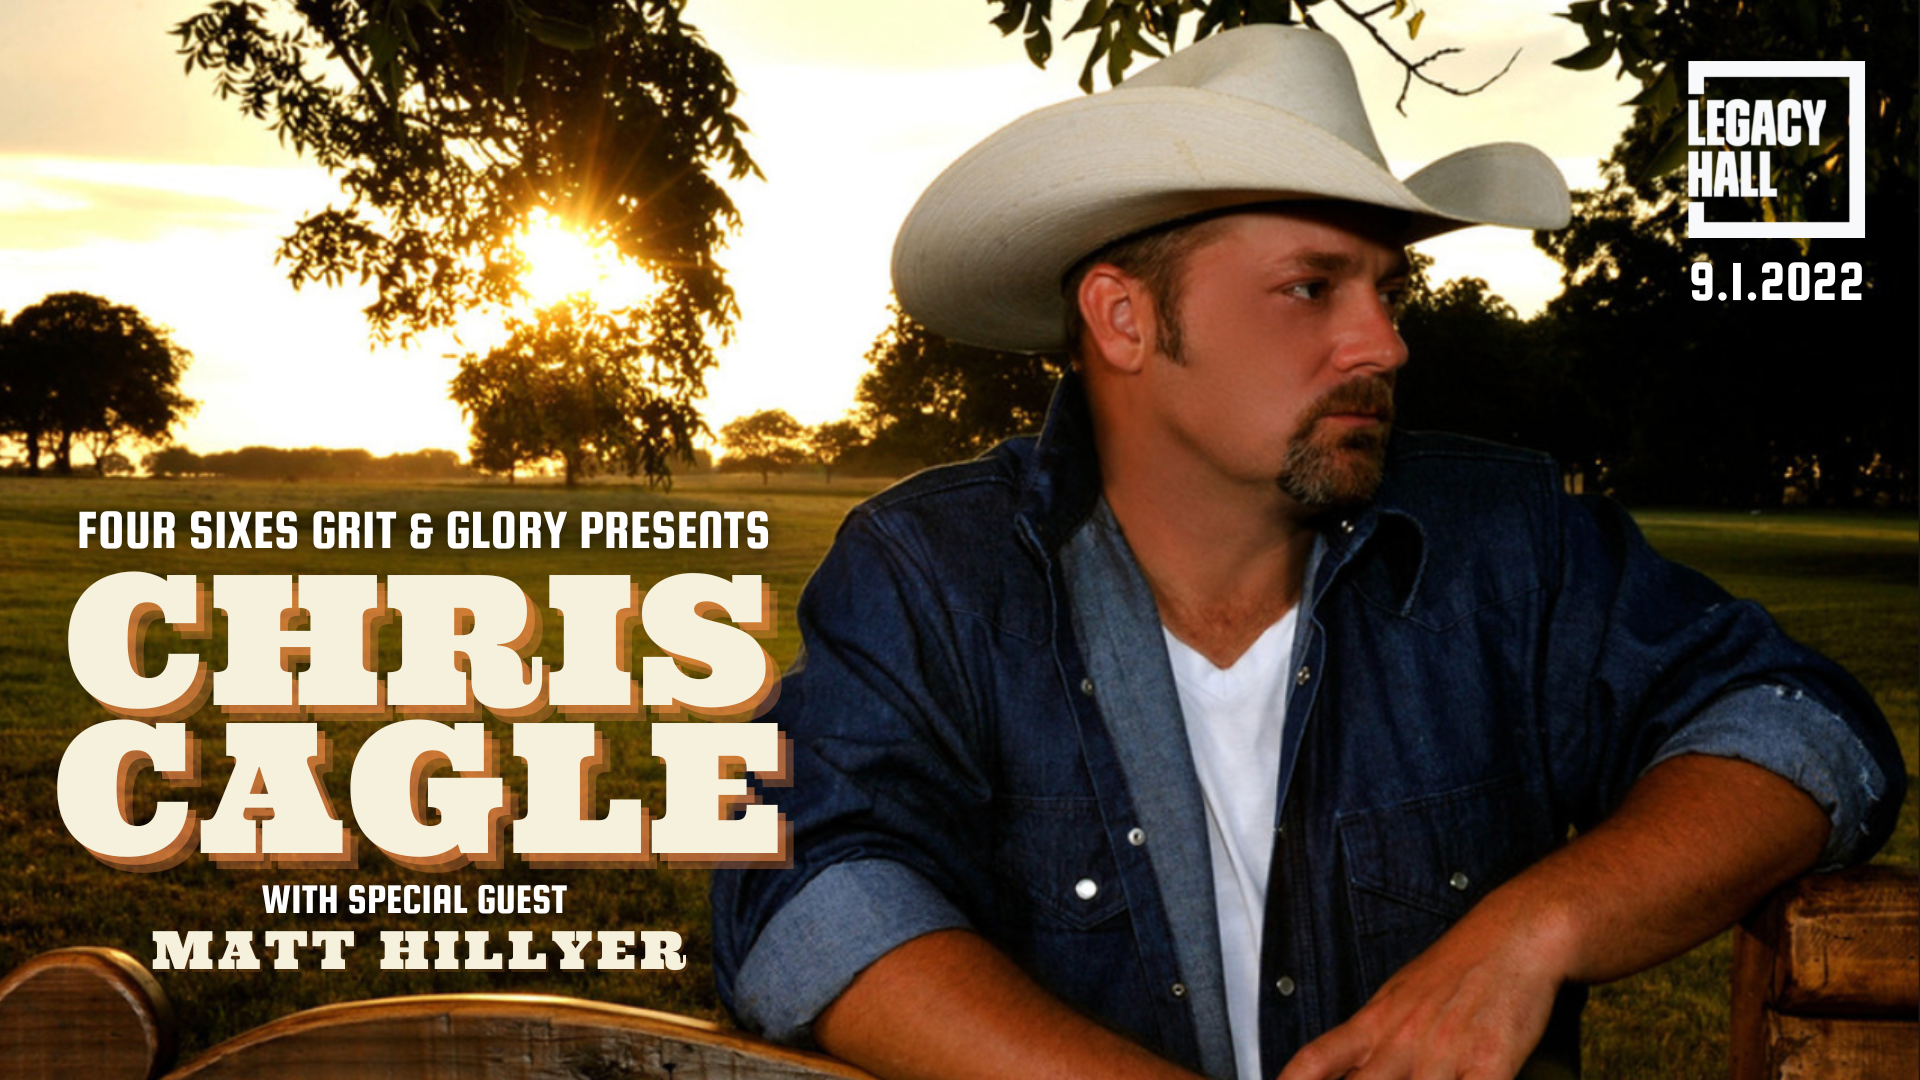 Four Sixes Grit & Glory presents Chris Cagle - hero